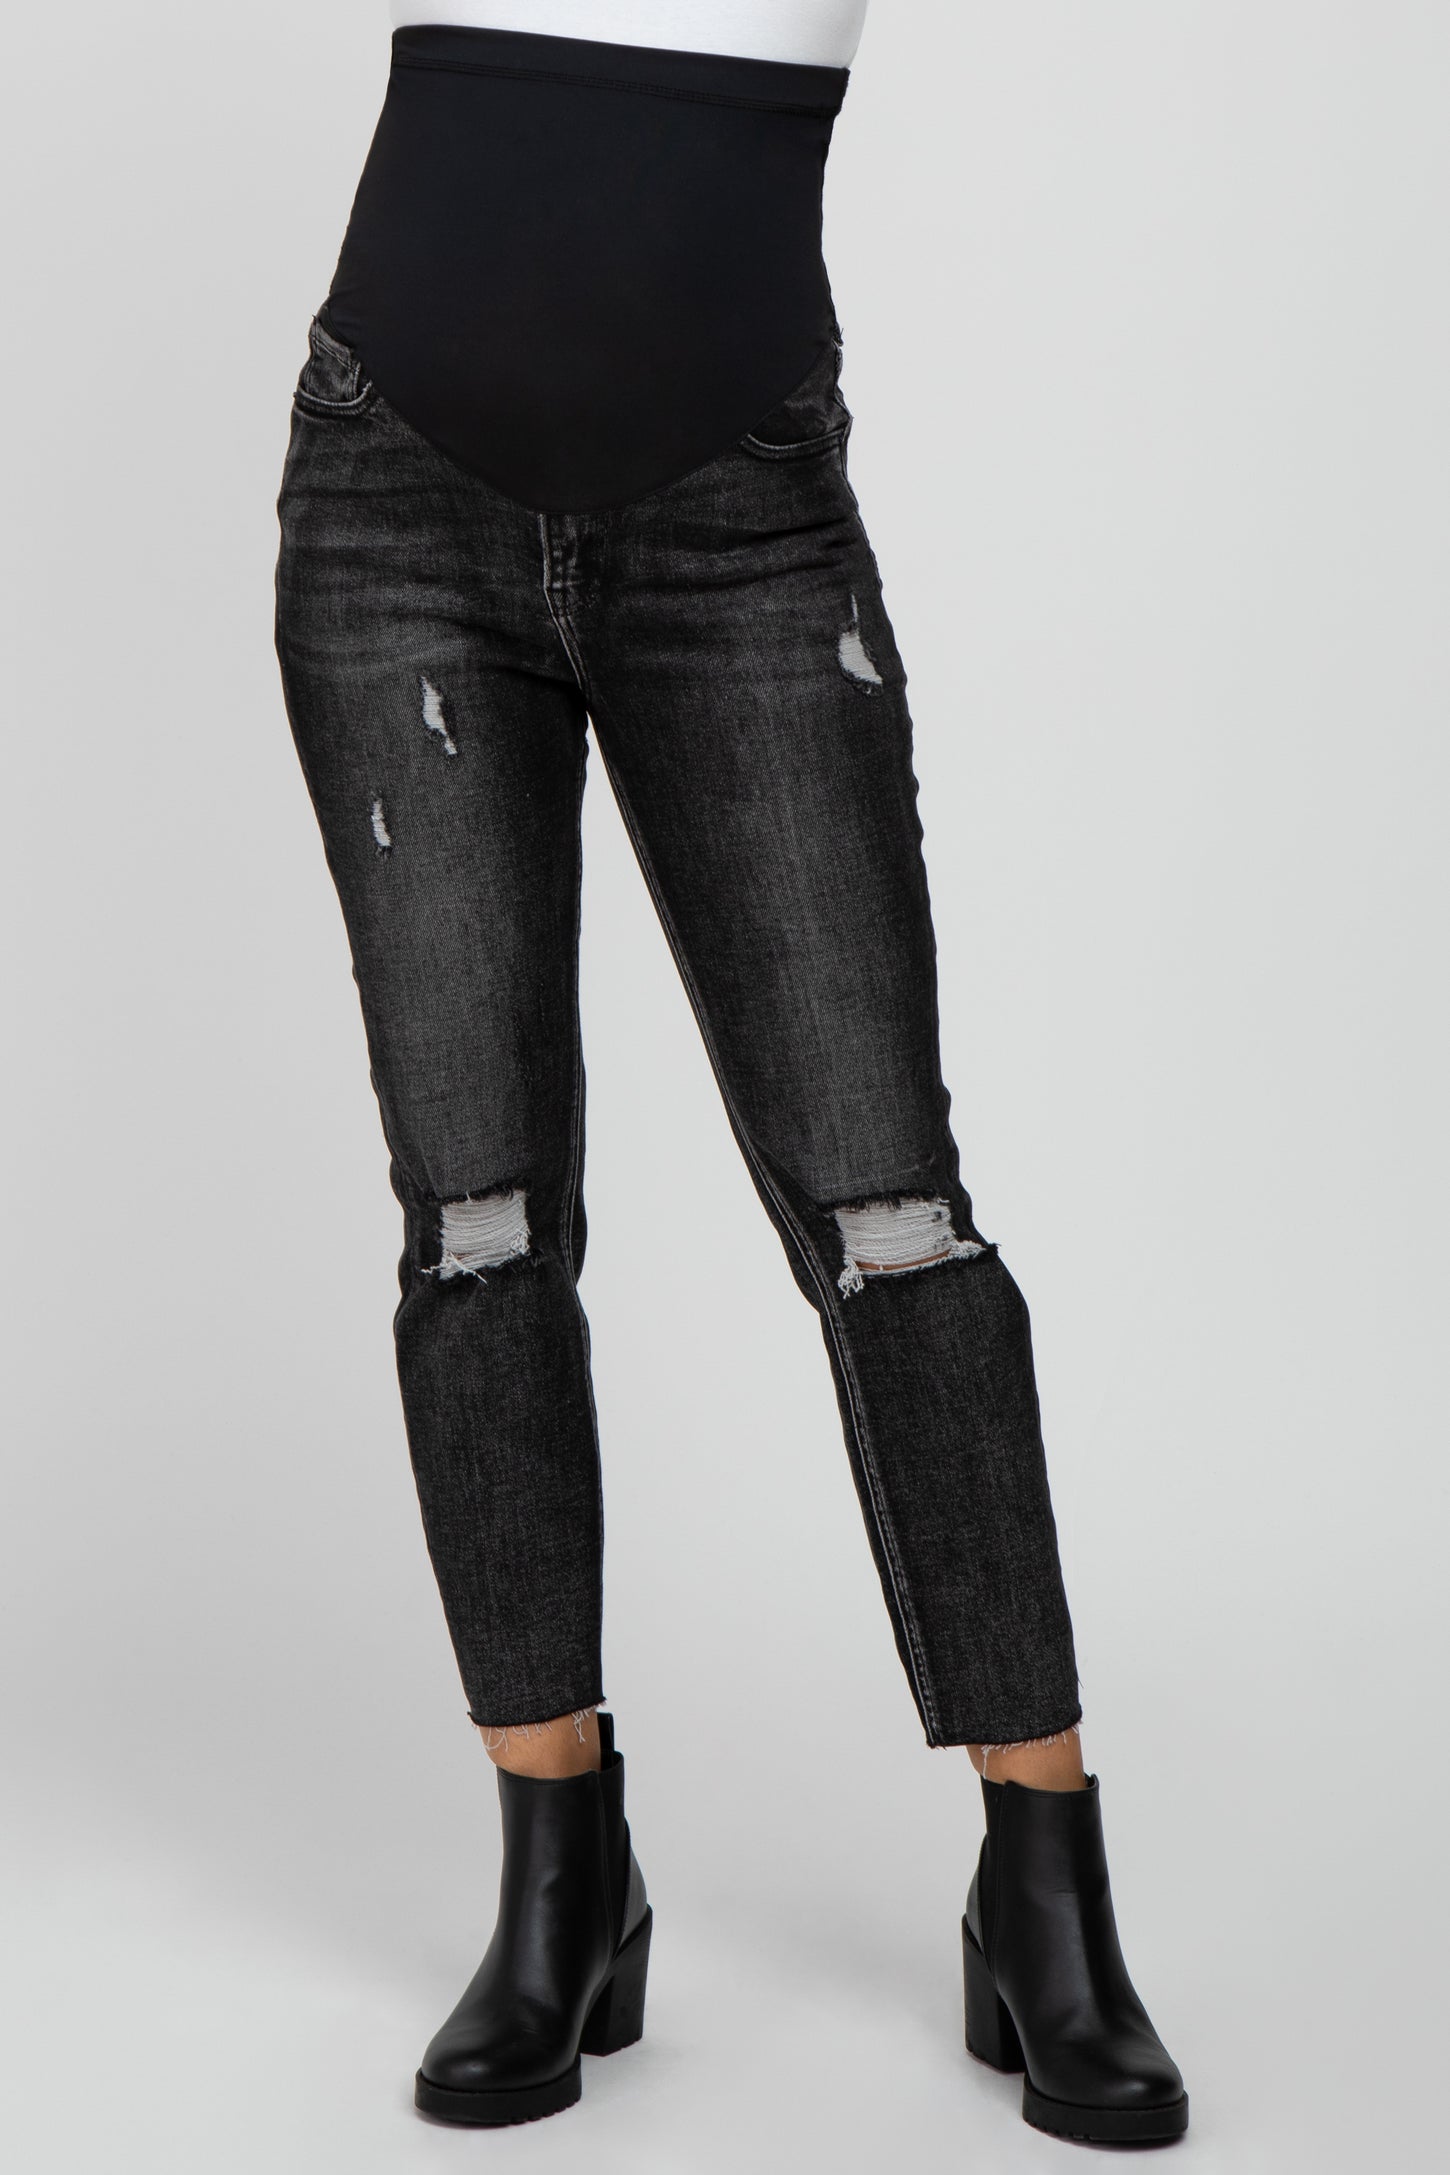 Faded Black Distressed Crop Maternity Jeans